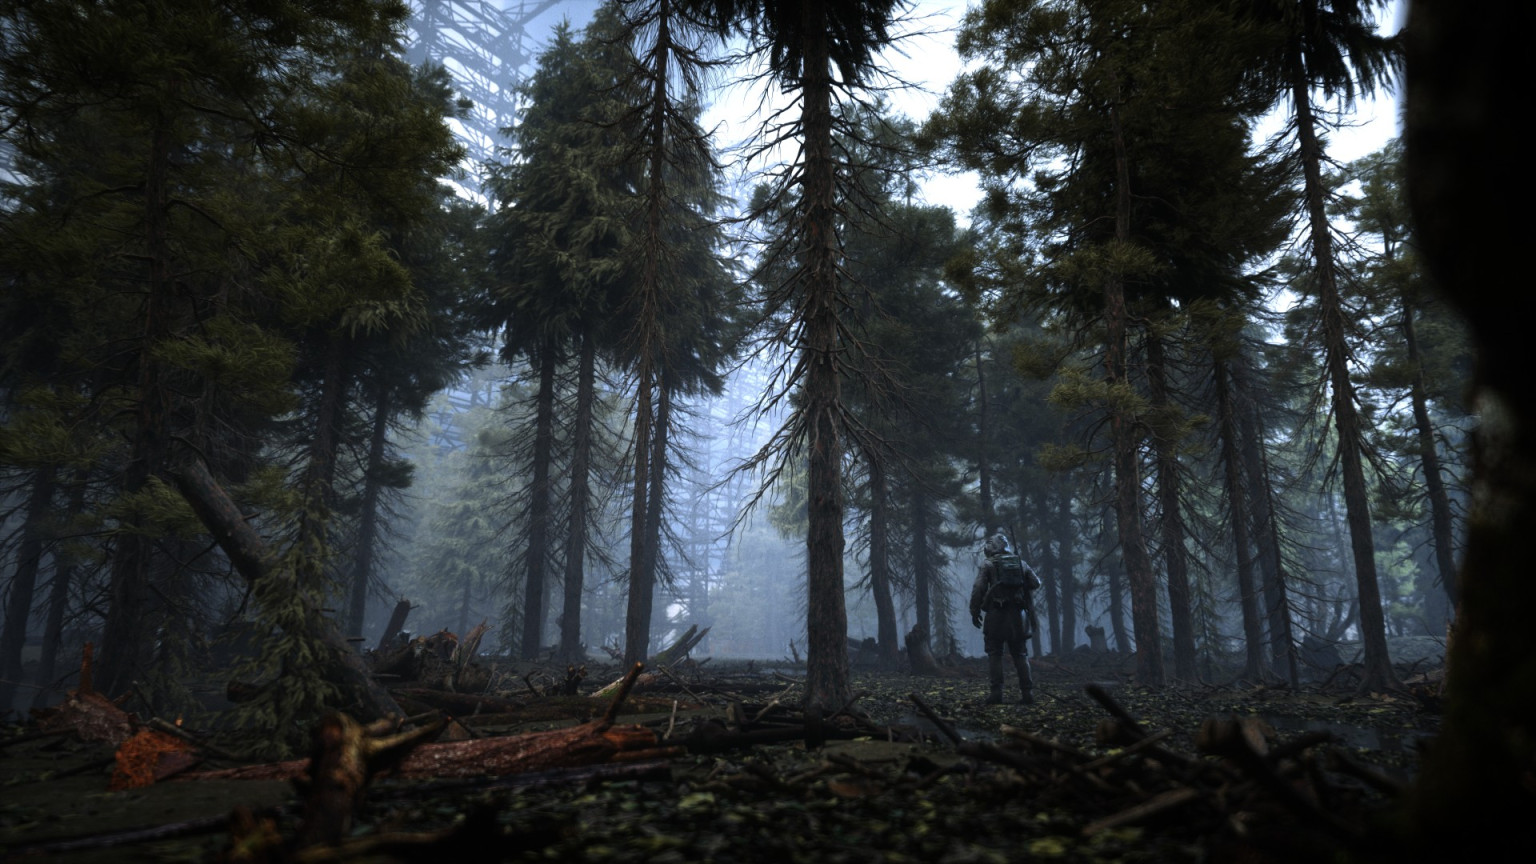 STALKER 2 announced, scheduled for 2021 release - Polygon